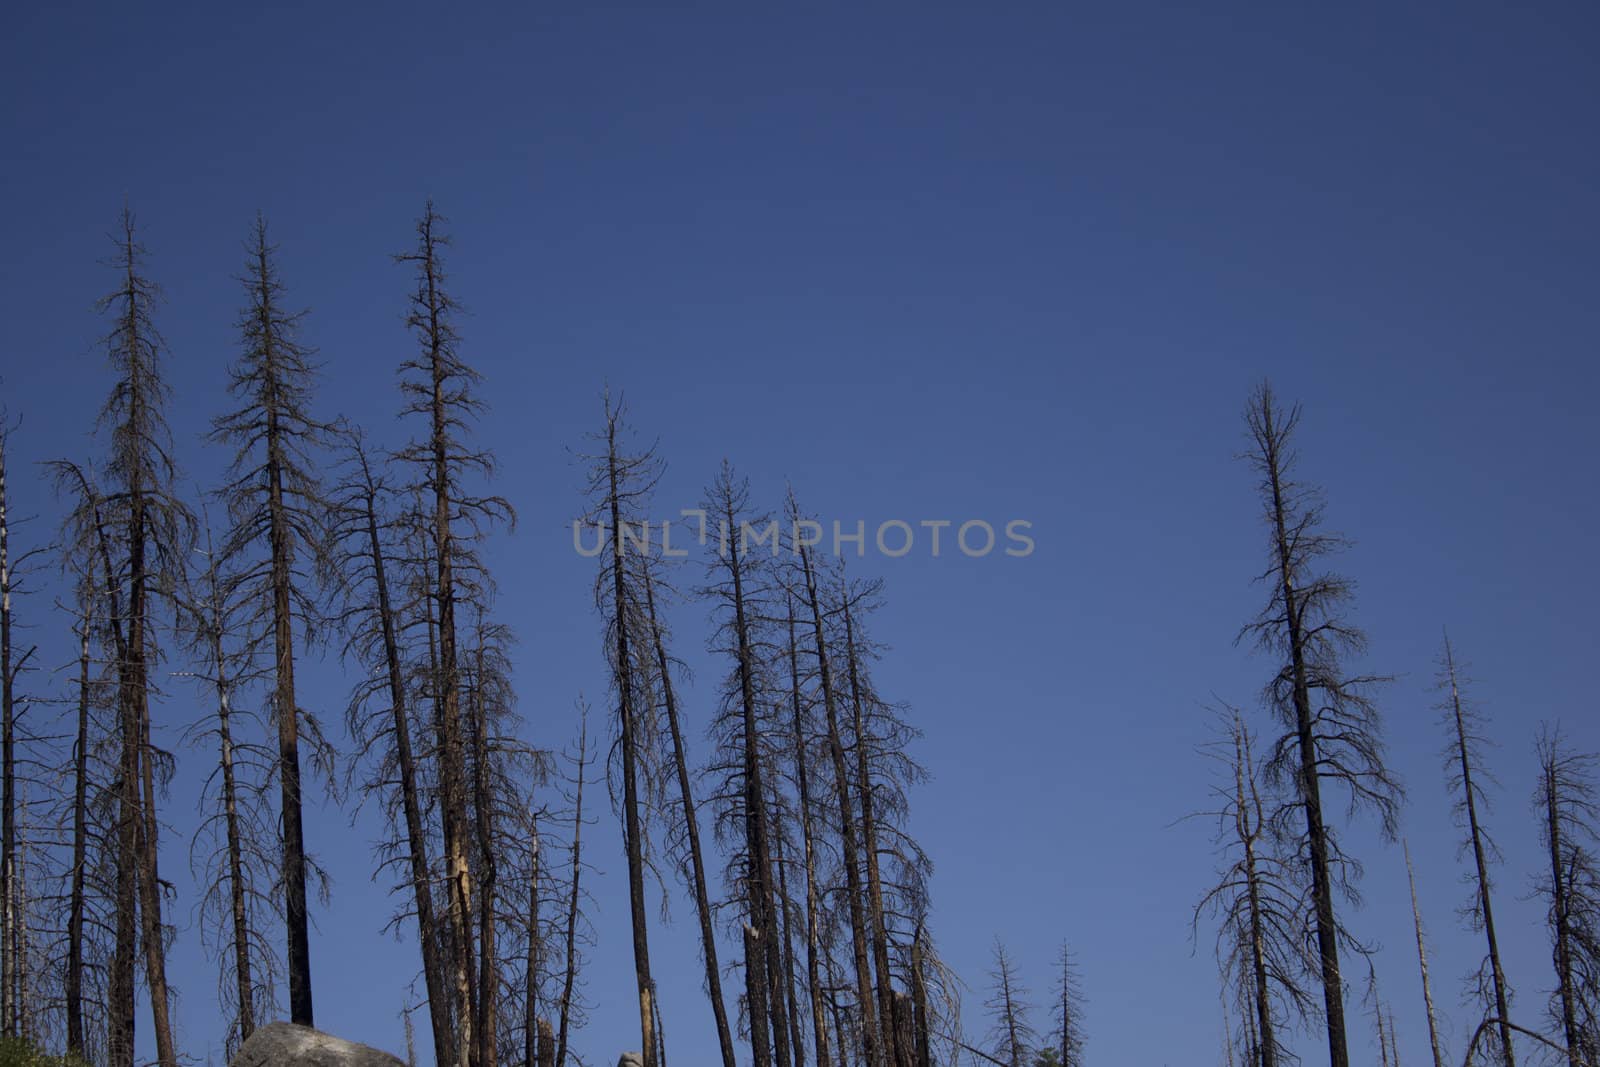 Burned trees in the forest by jeremywhat